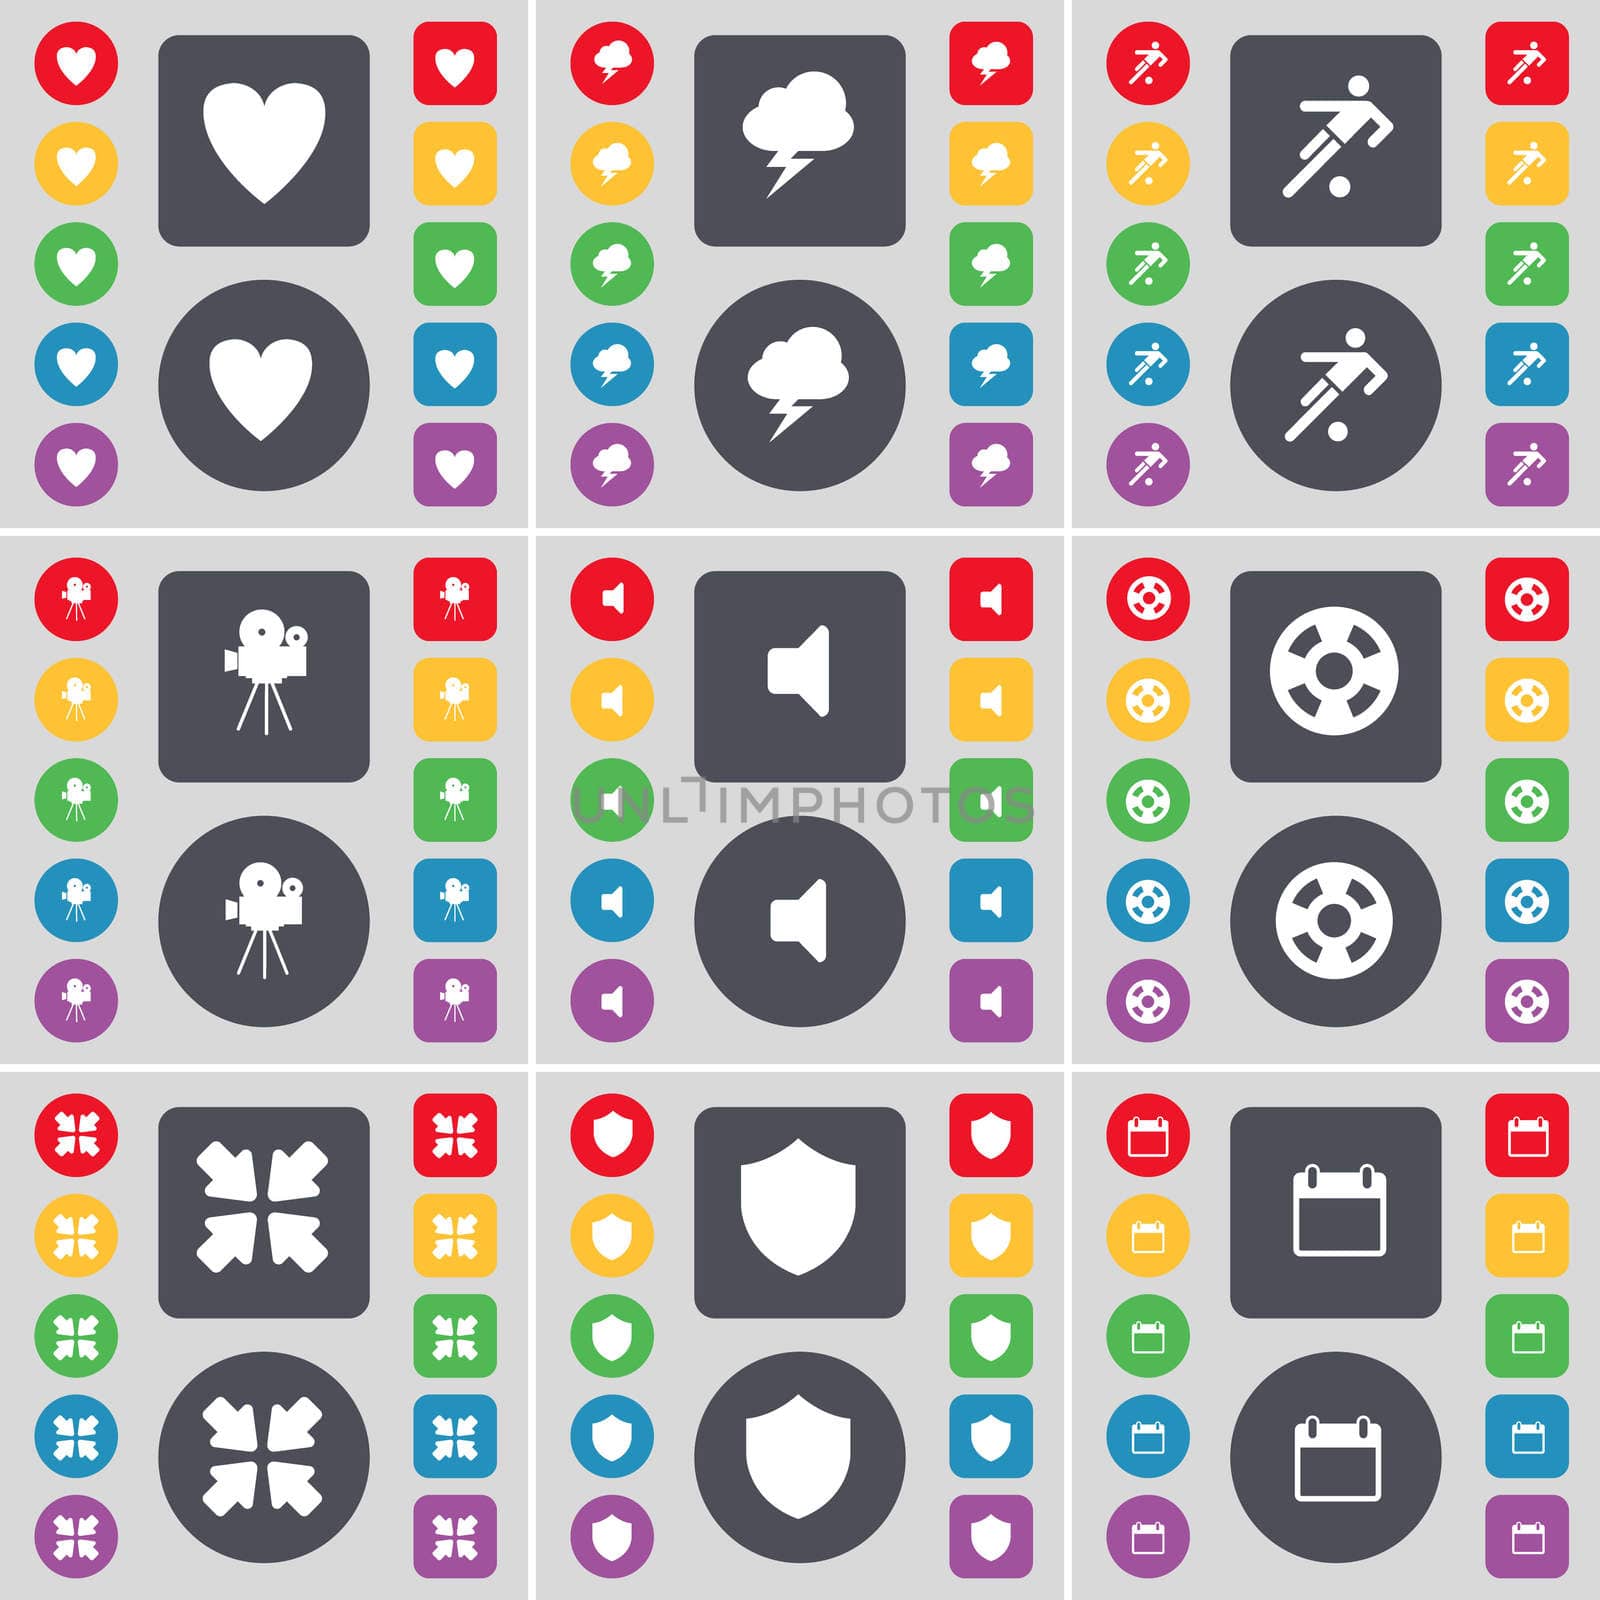 Heart, Lightning, Football, Film camera, Sound, Videotape, Deploying screen, Badge, Calendar icon symbol. A large set of flat, colored buttons for your design. illustration